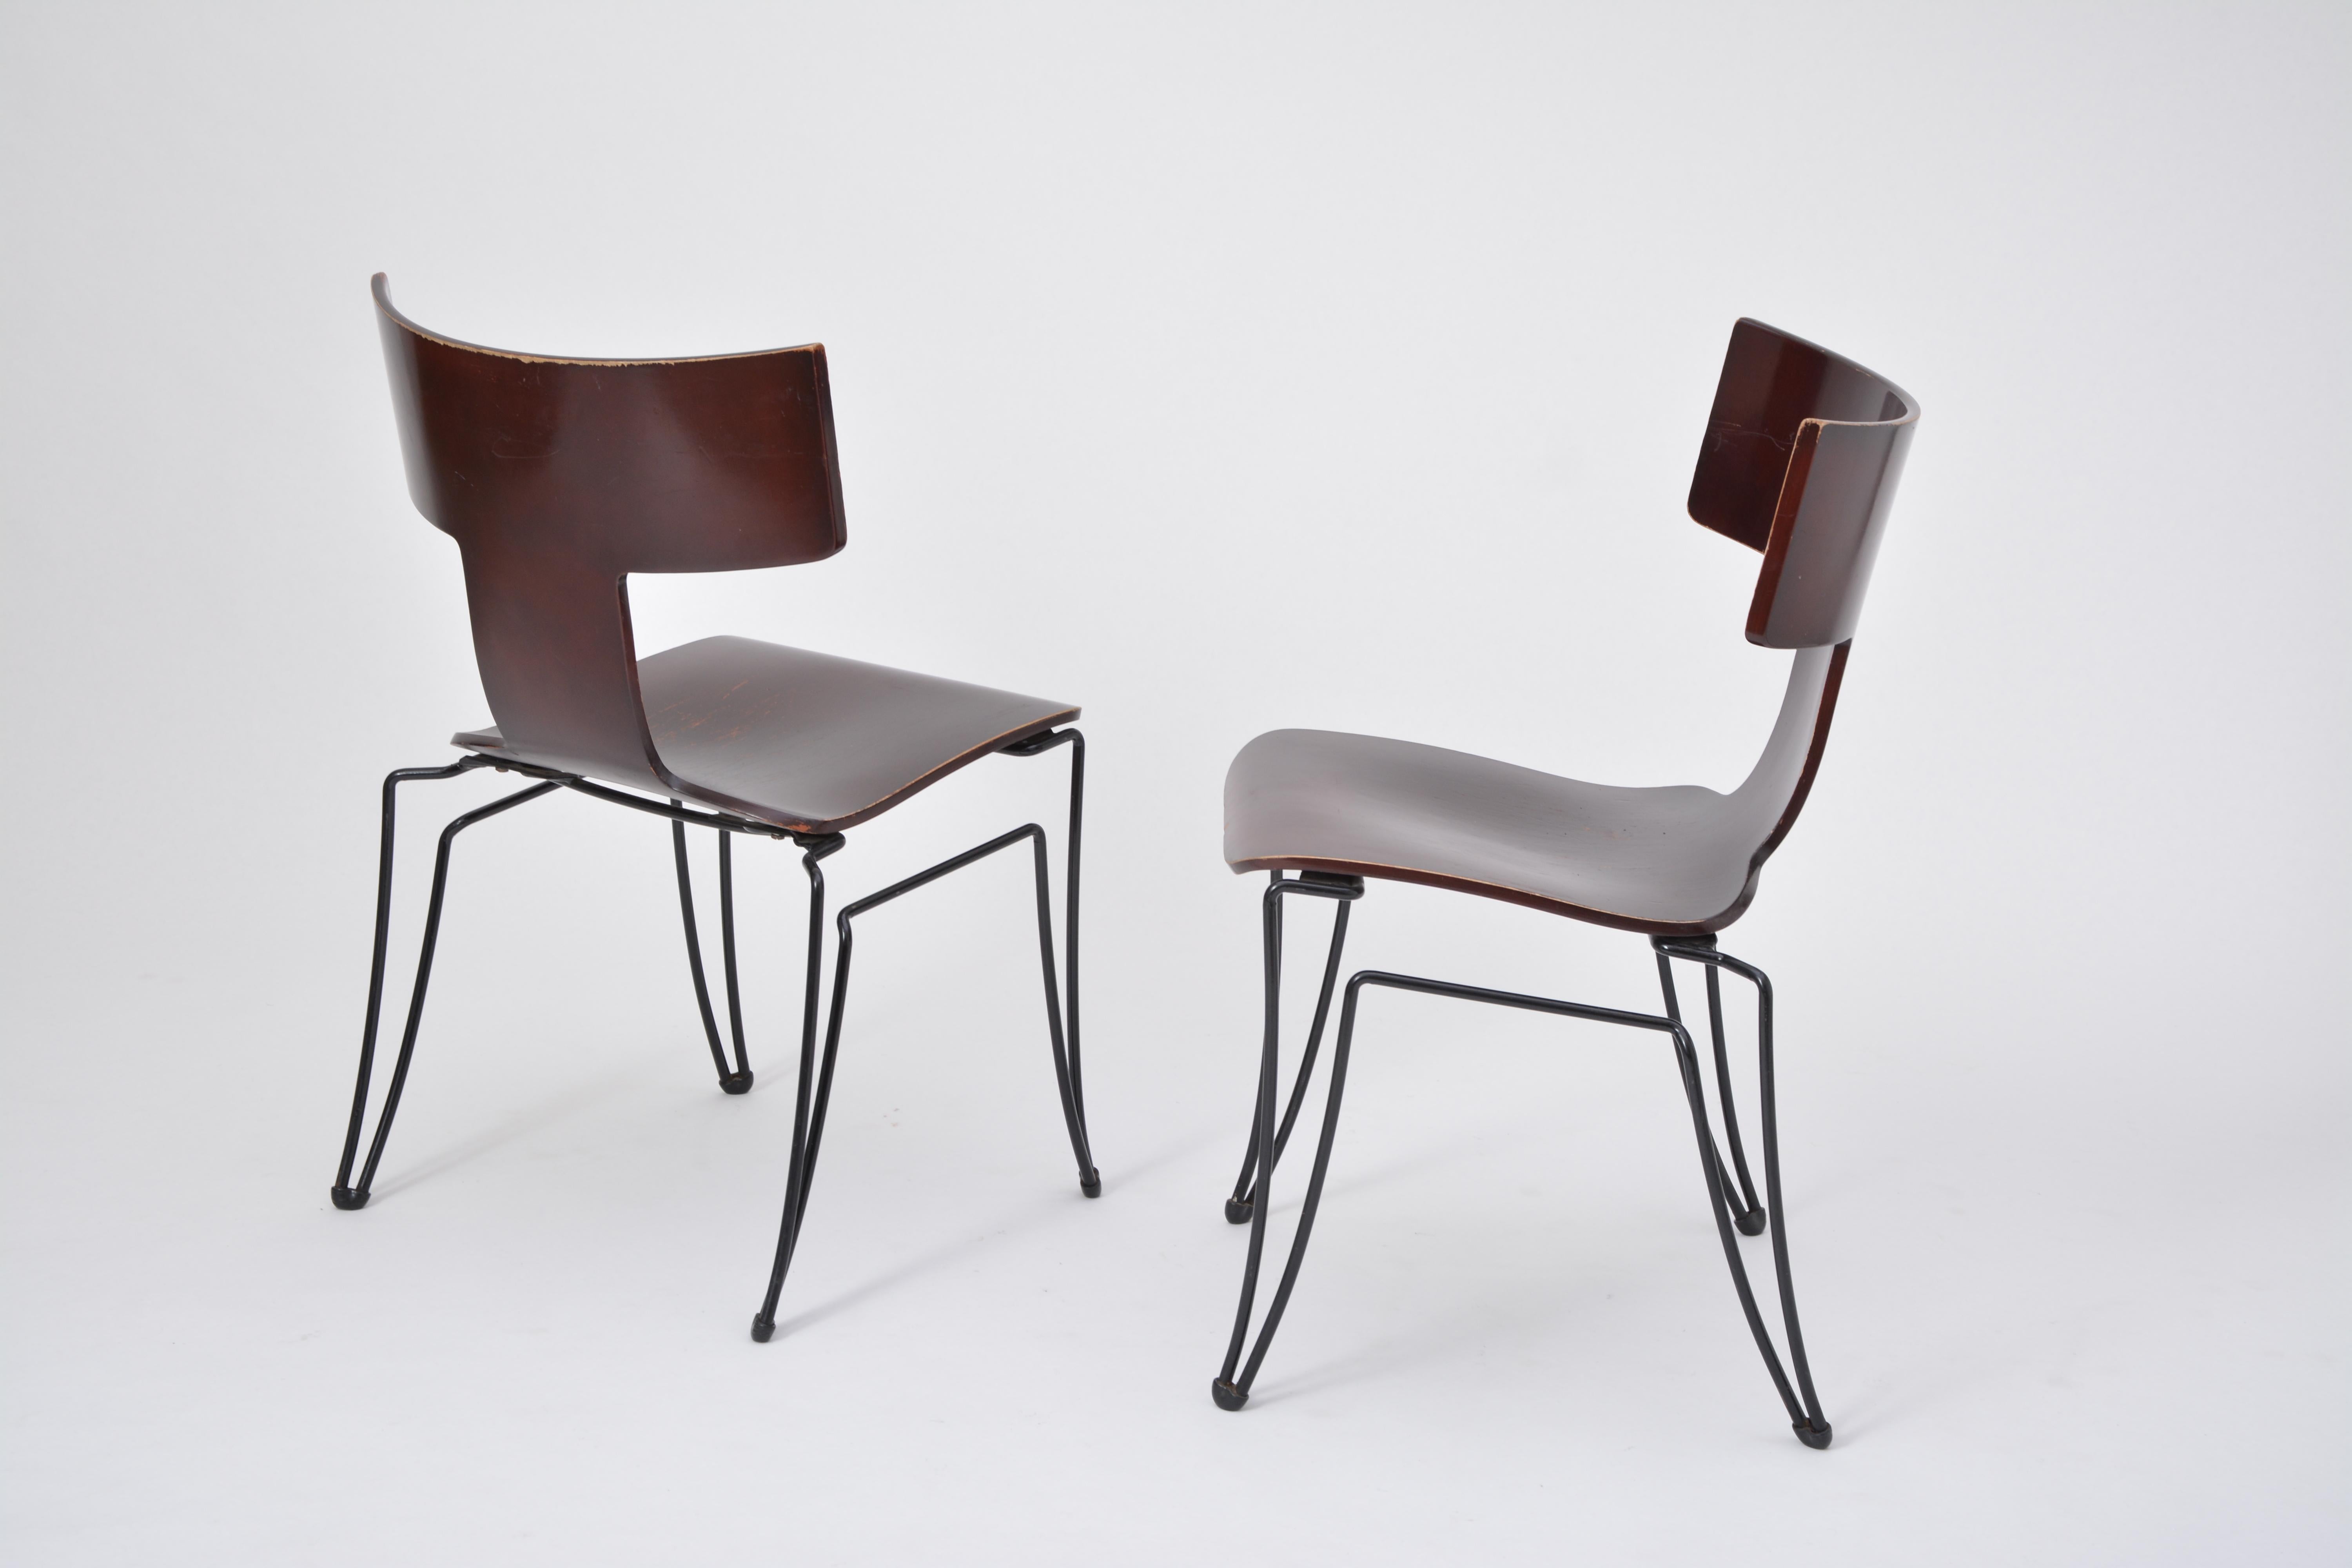 This set of four chairs was produced by Donghia in the 1980s. The model Anziano was designed by John Hutton. The structures are made of black coated steelwire, the seats are made of molded beechwood veneer. The chairs are stackable.